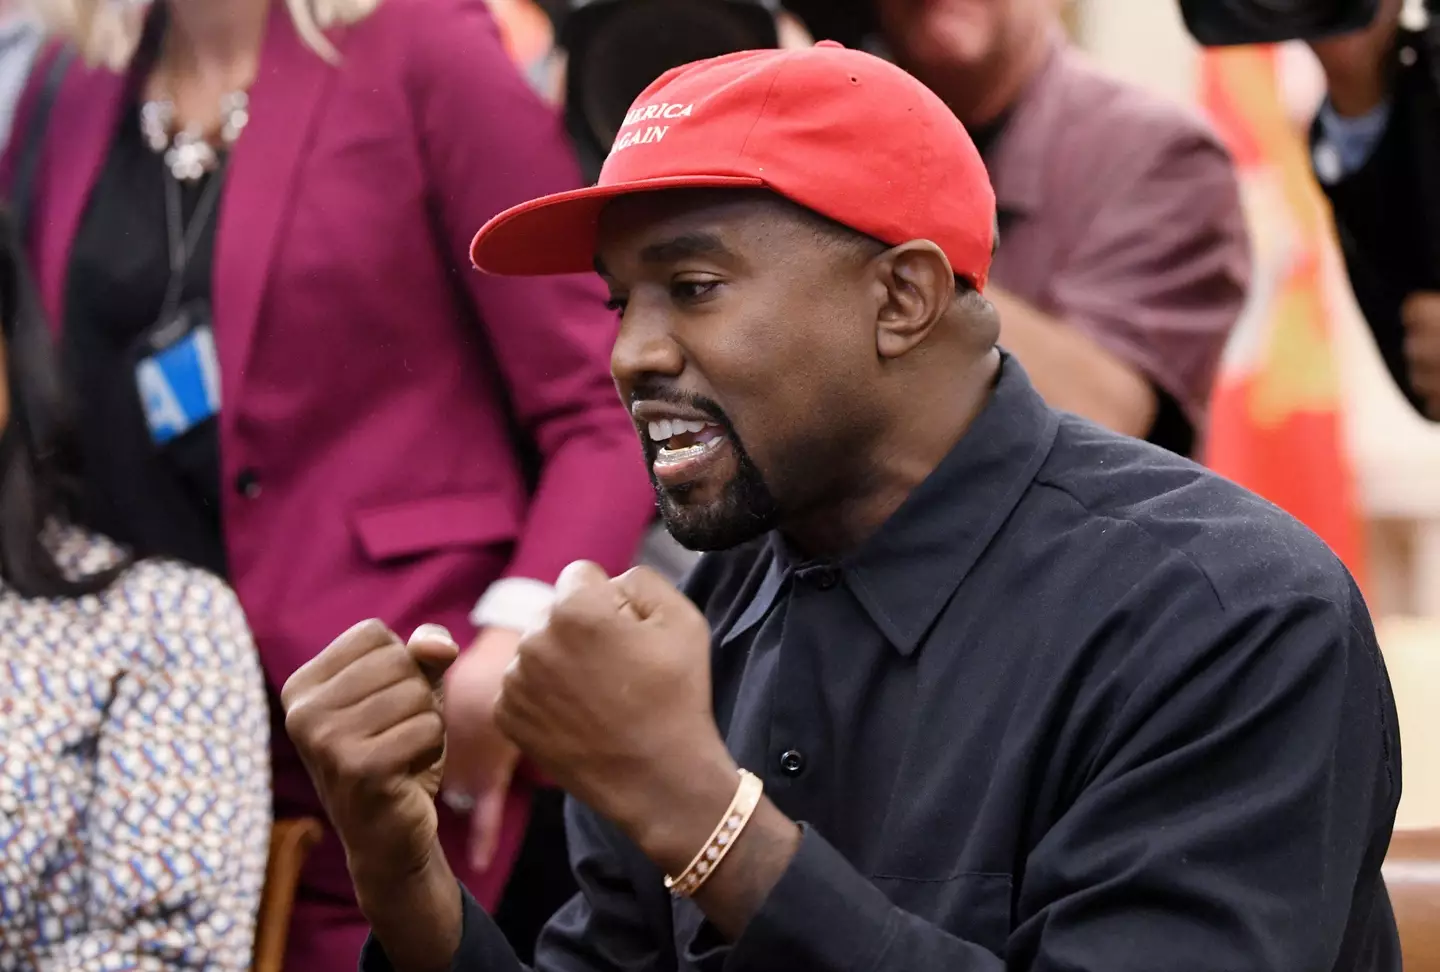 Kanye West has been banned from Twitter again.